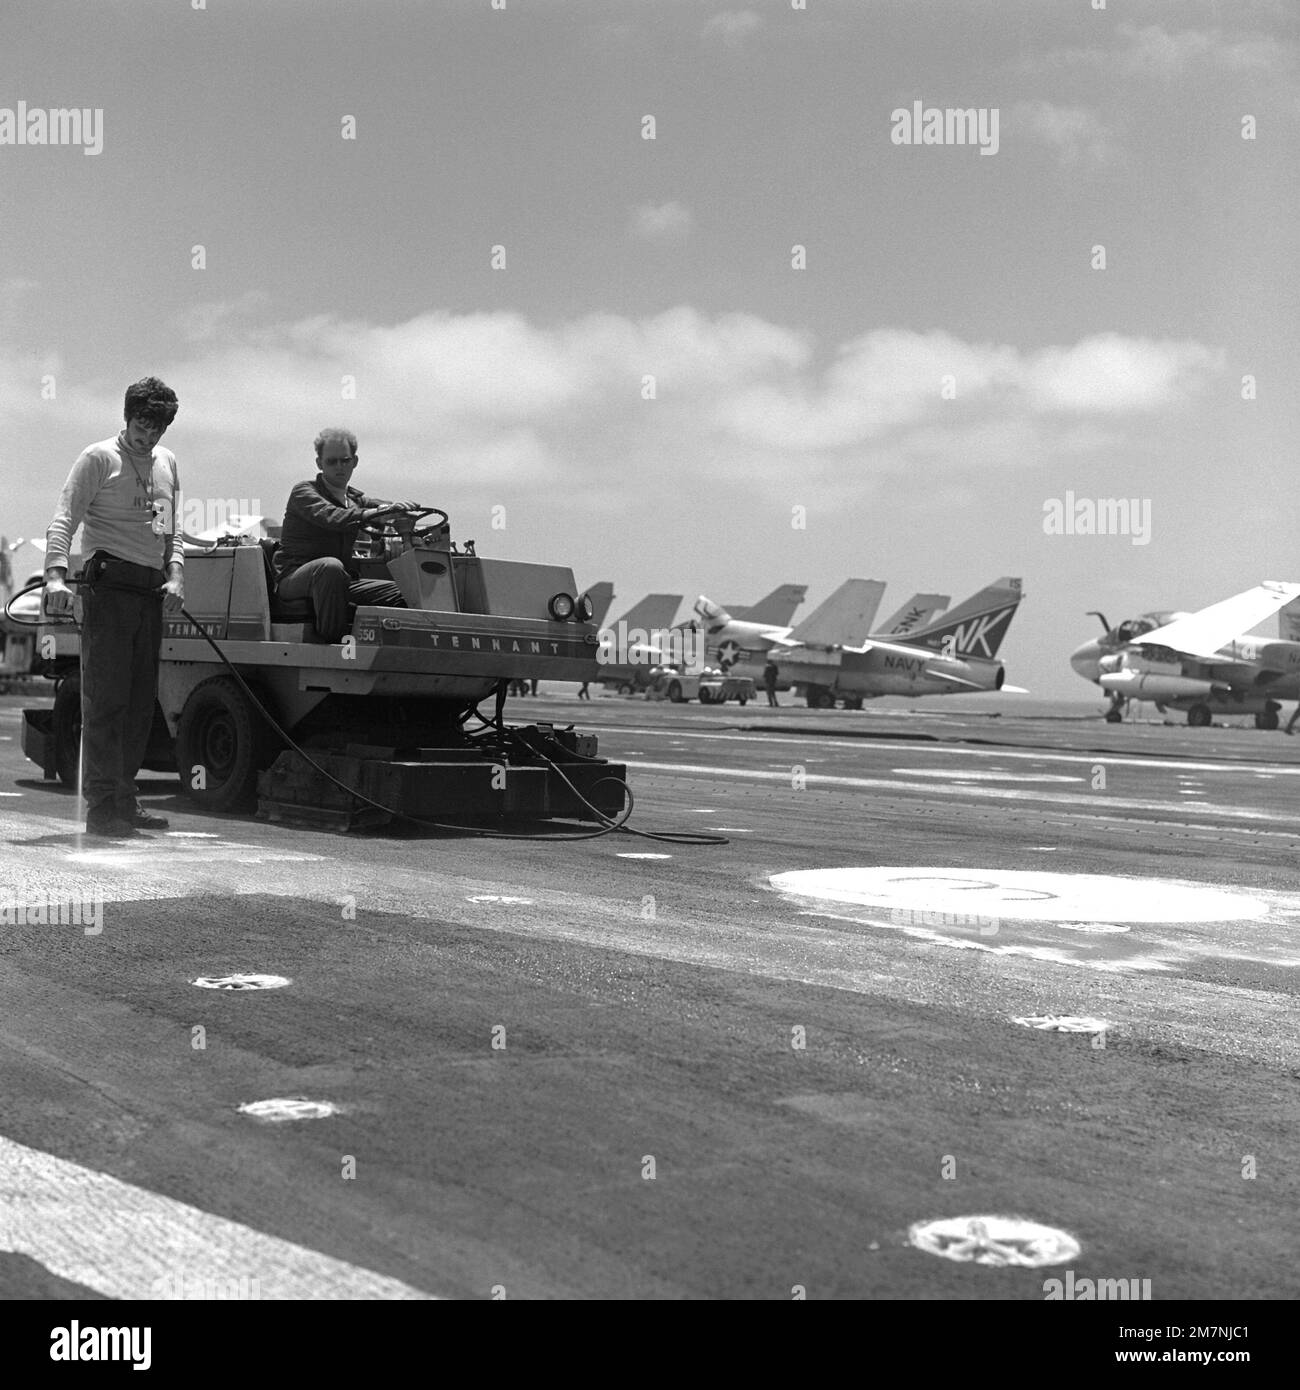 Crew members perform maintenance on the flight deck of the aircraft carrier USS CORAL SEA (CV-43). Parked in the background are A-7E Corsair II aircraft and an A-6E Intruder aircraft, right. Country: Indian Ocean (IOC) Stock Photo